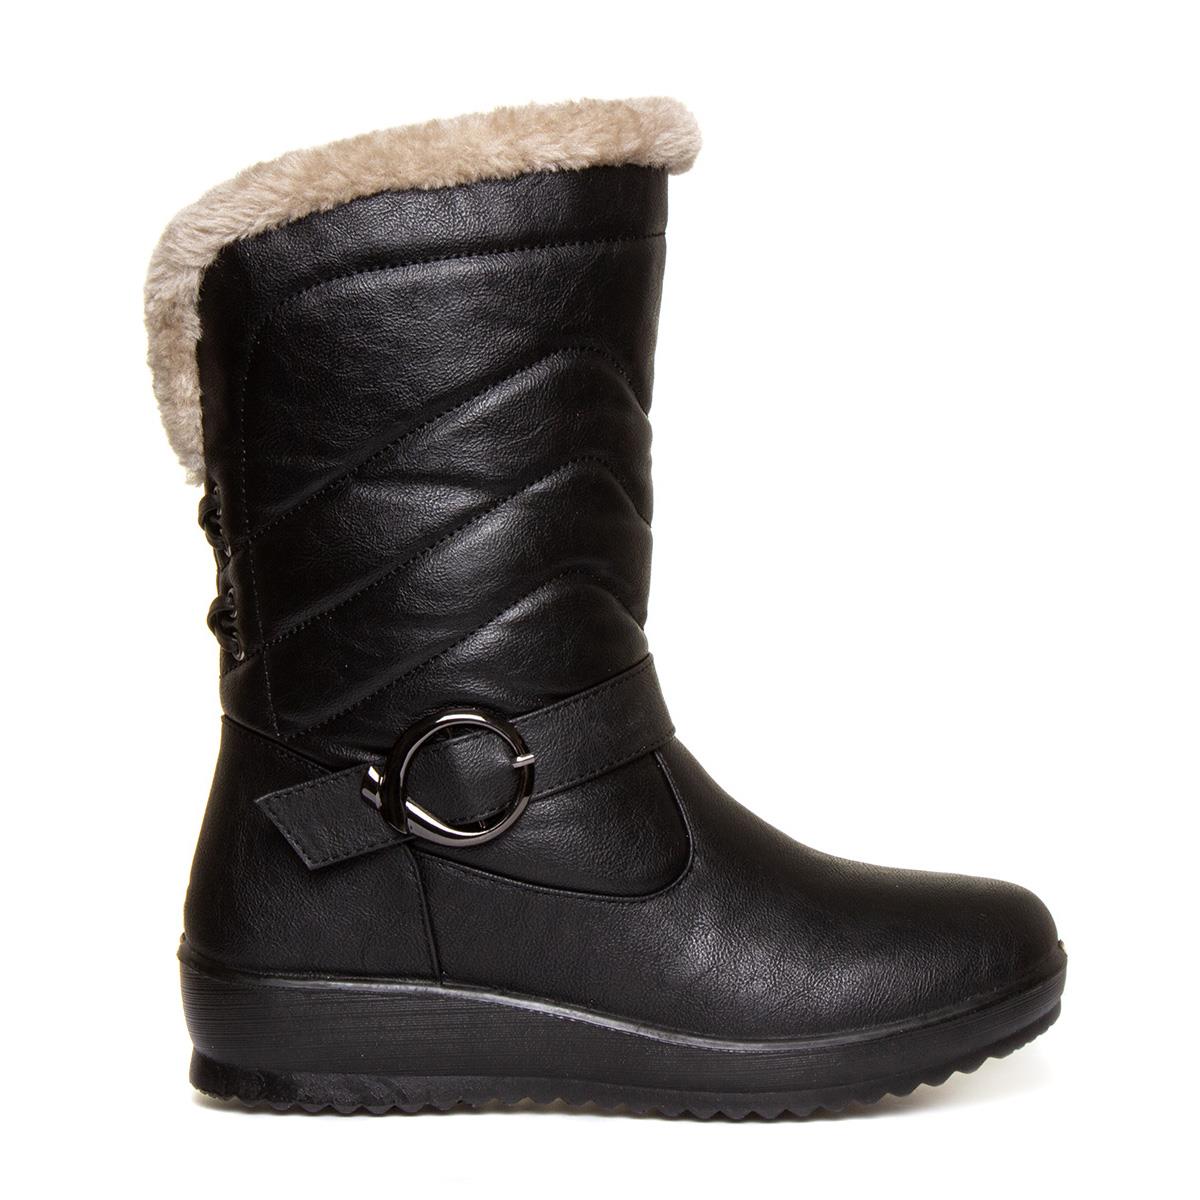 Softlites Womens Black Quilted Pull On Calf Boot-18451 | Shoe Zone